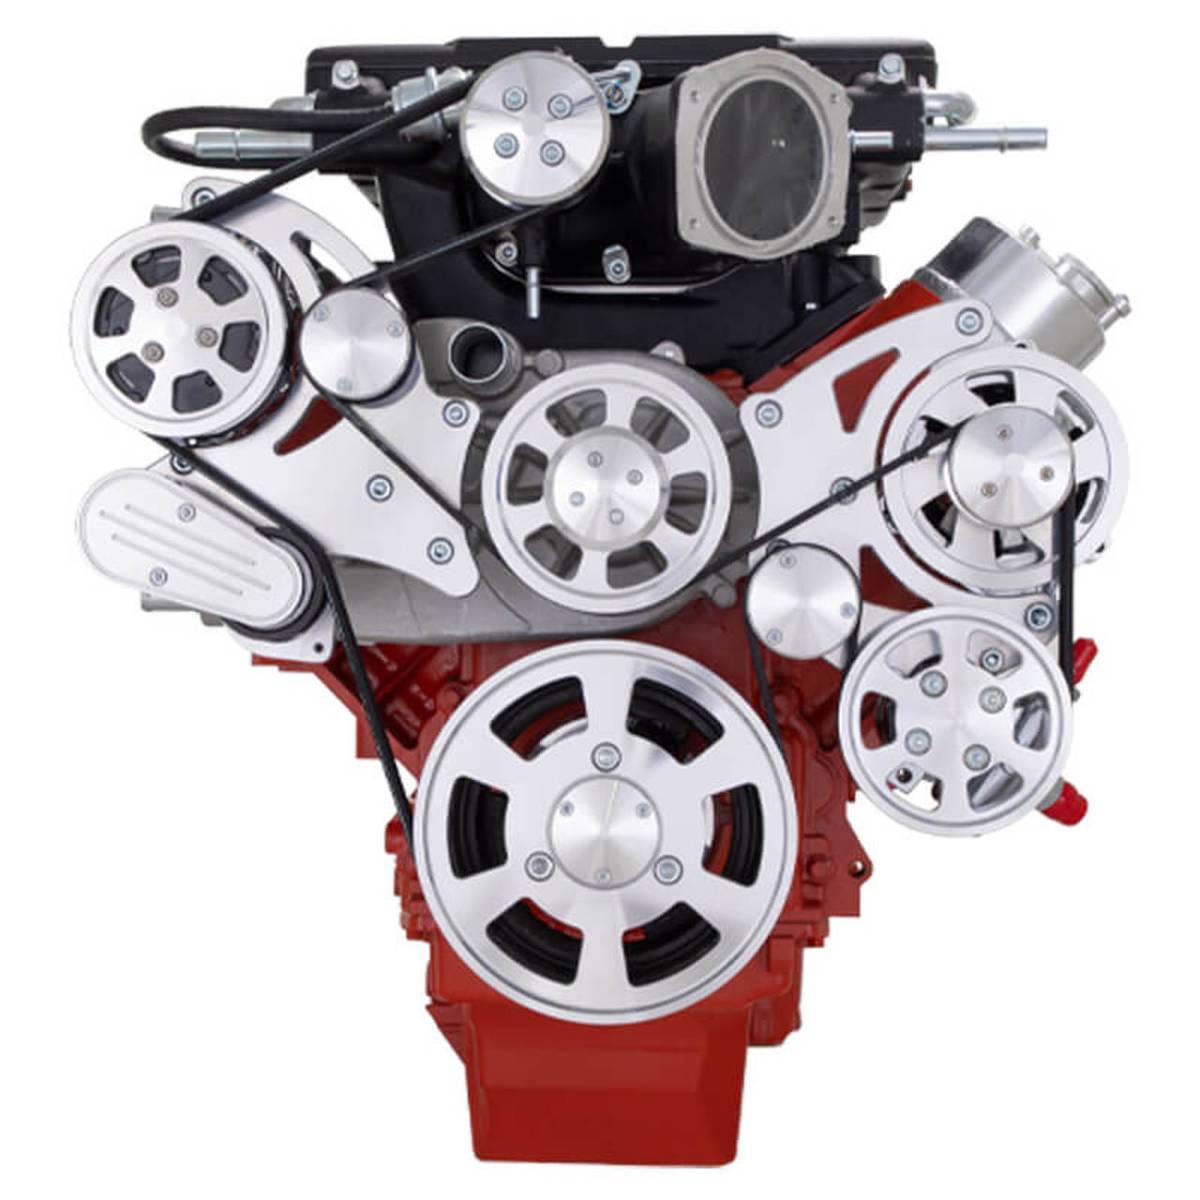 CVF Racing - CVF Wraptor Chevy LS Engine Whipple 2.3L or 2.9L Serpentine Bracket System with Alternator Only - Polished - Image 1